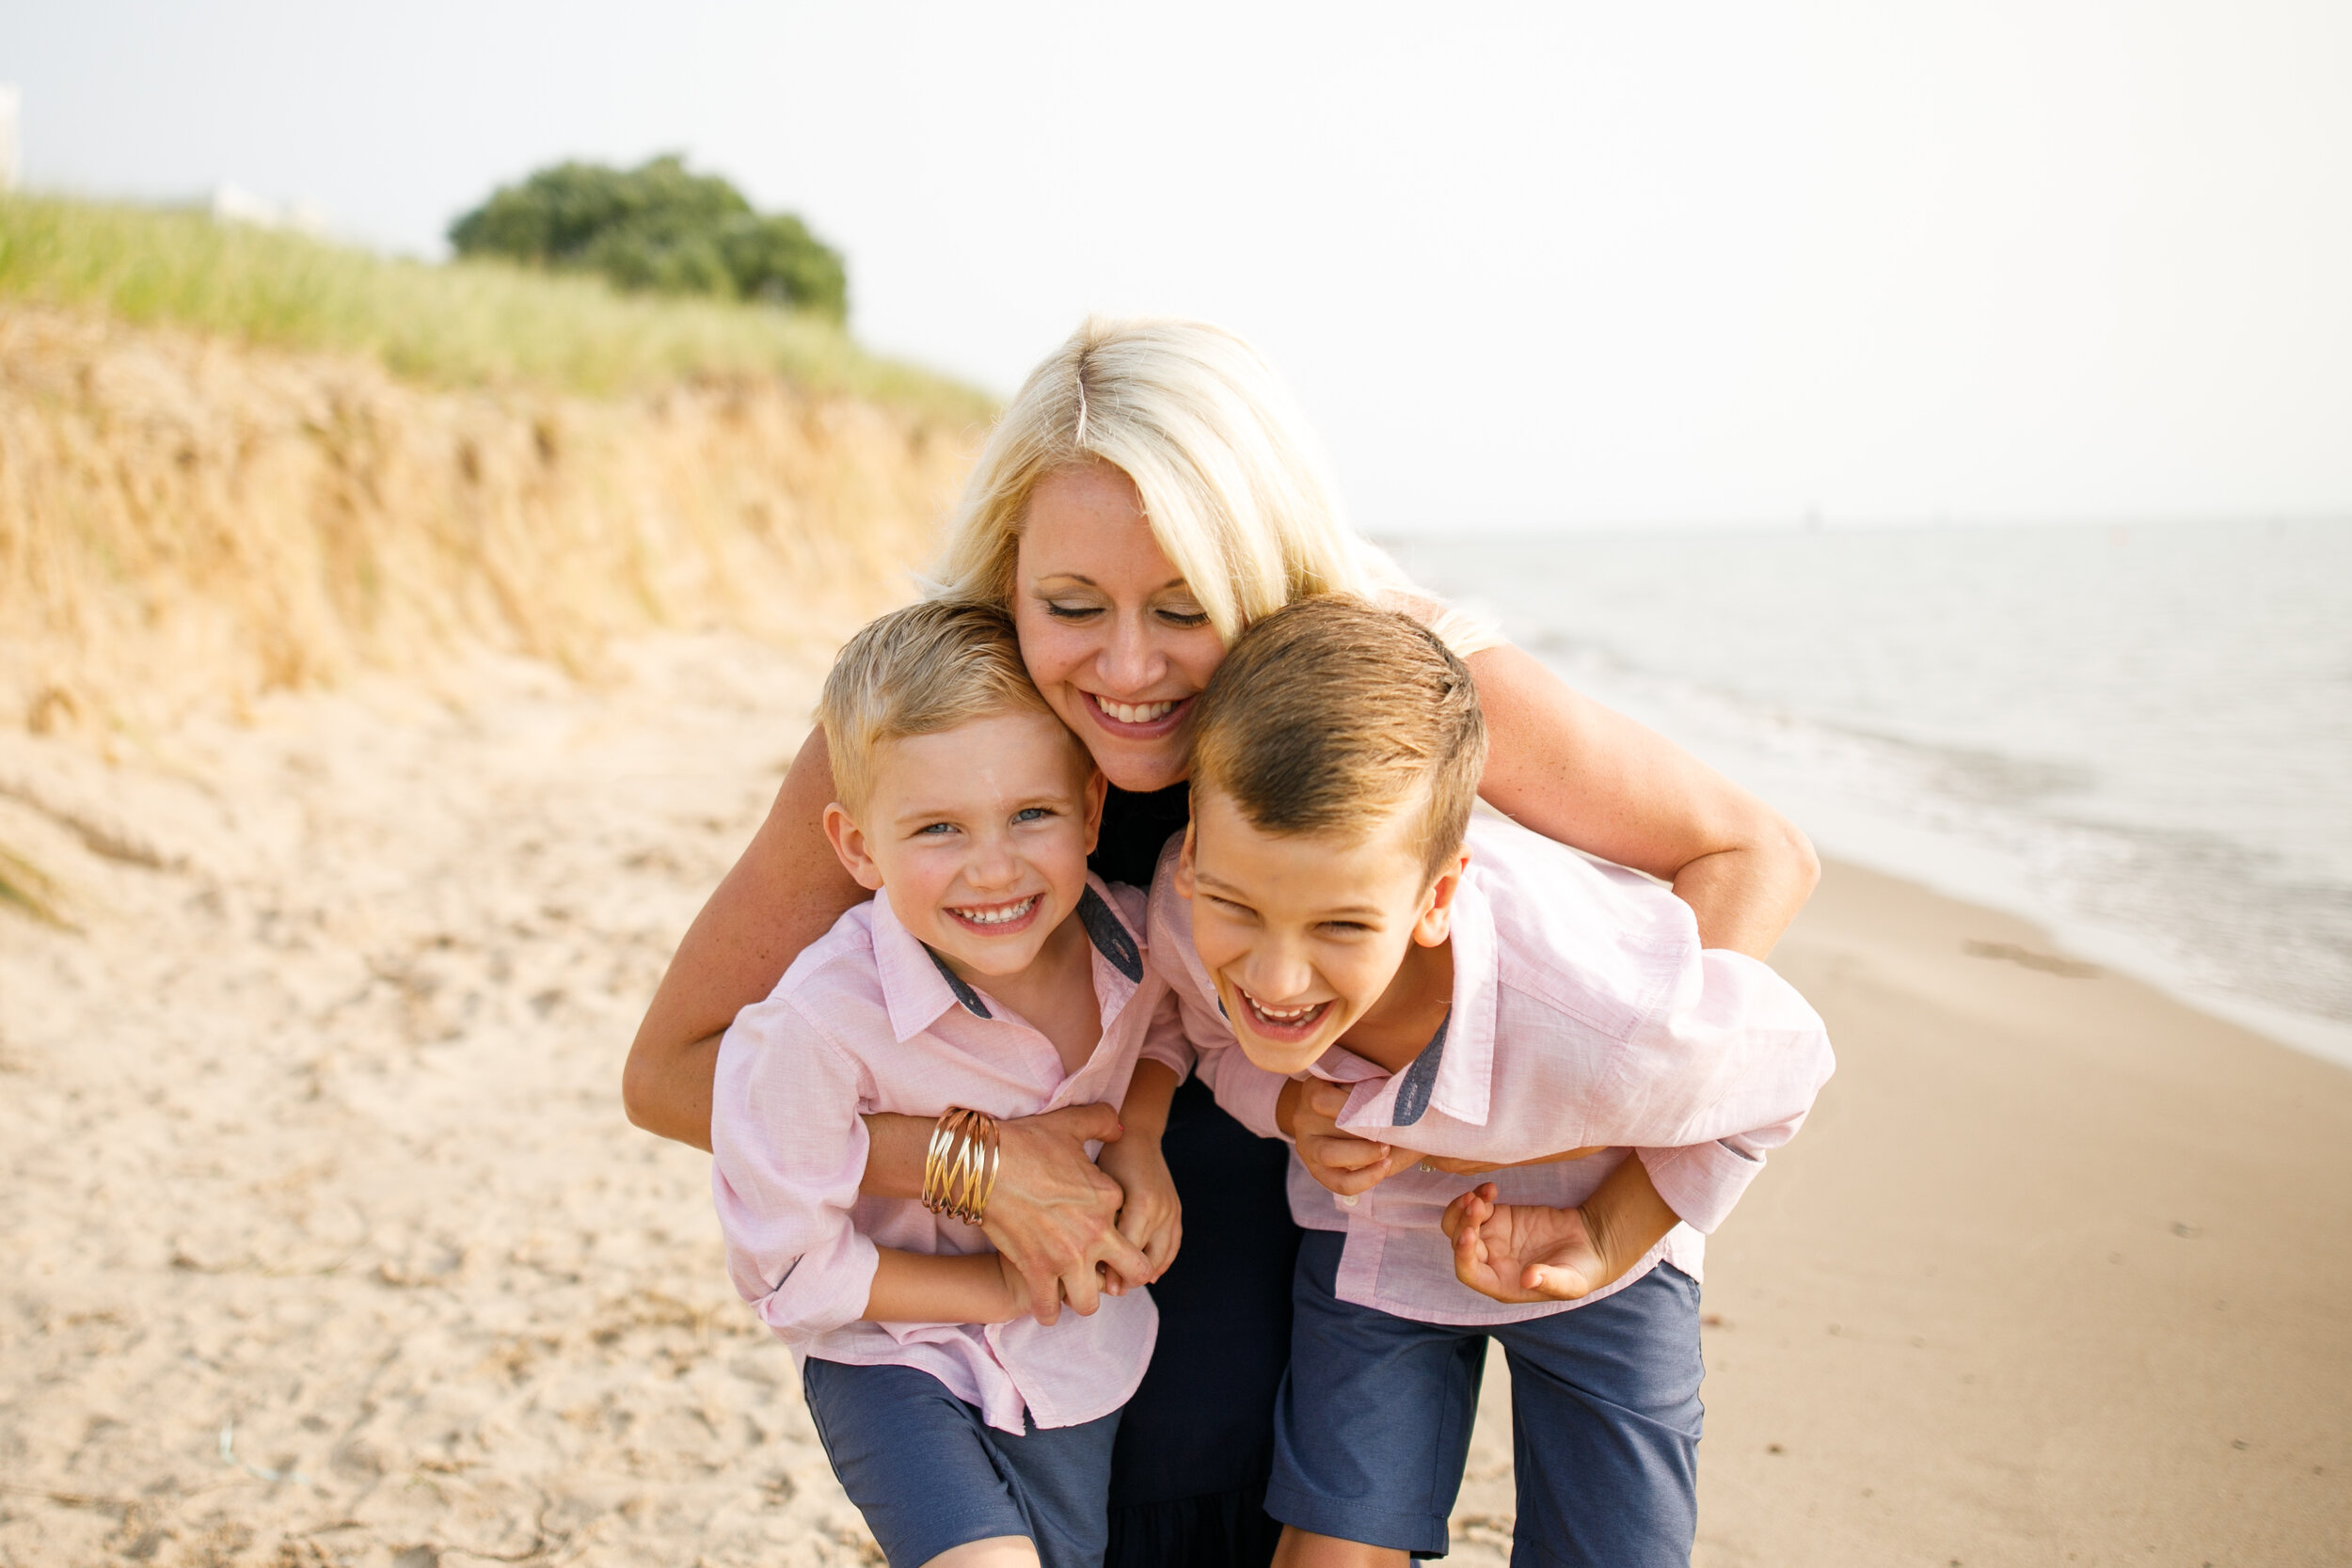 south haven family session - south haven family photographer - j darling photo024.jpg